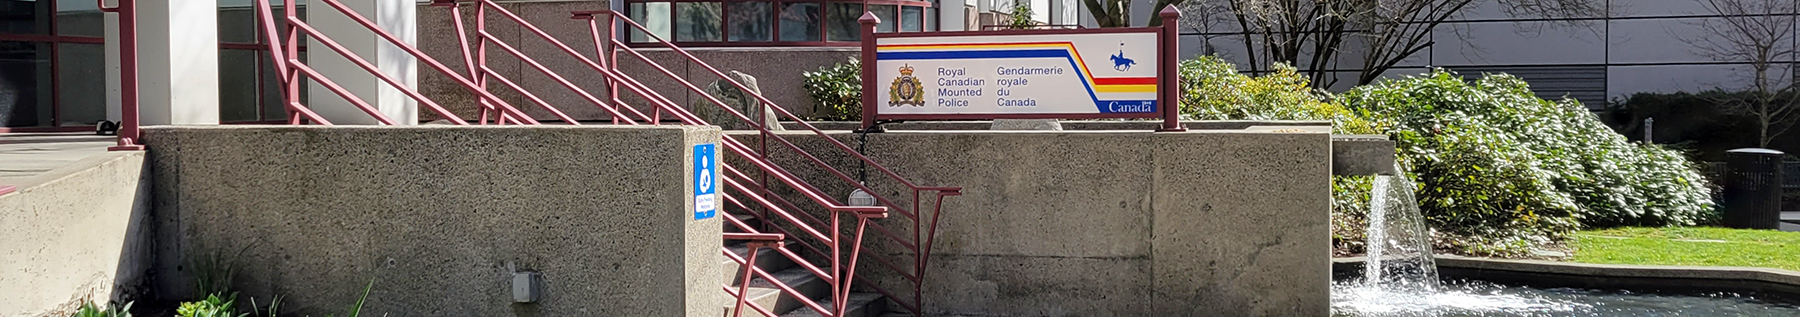 exterior of RCMP building